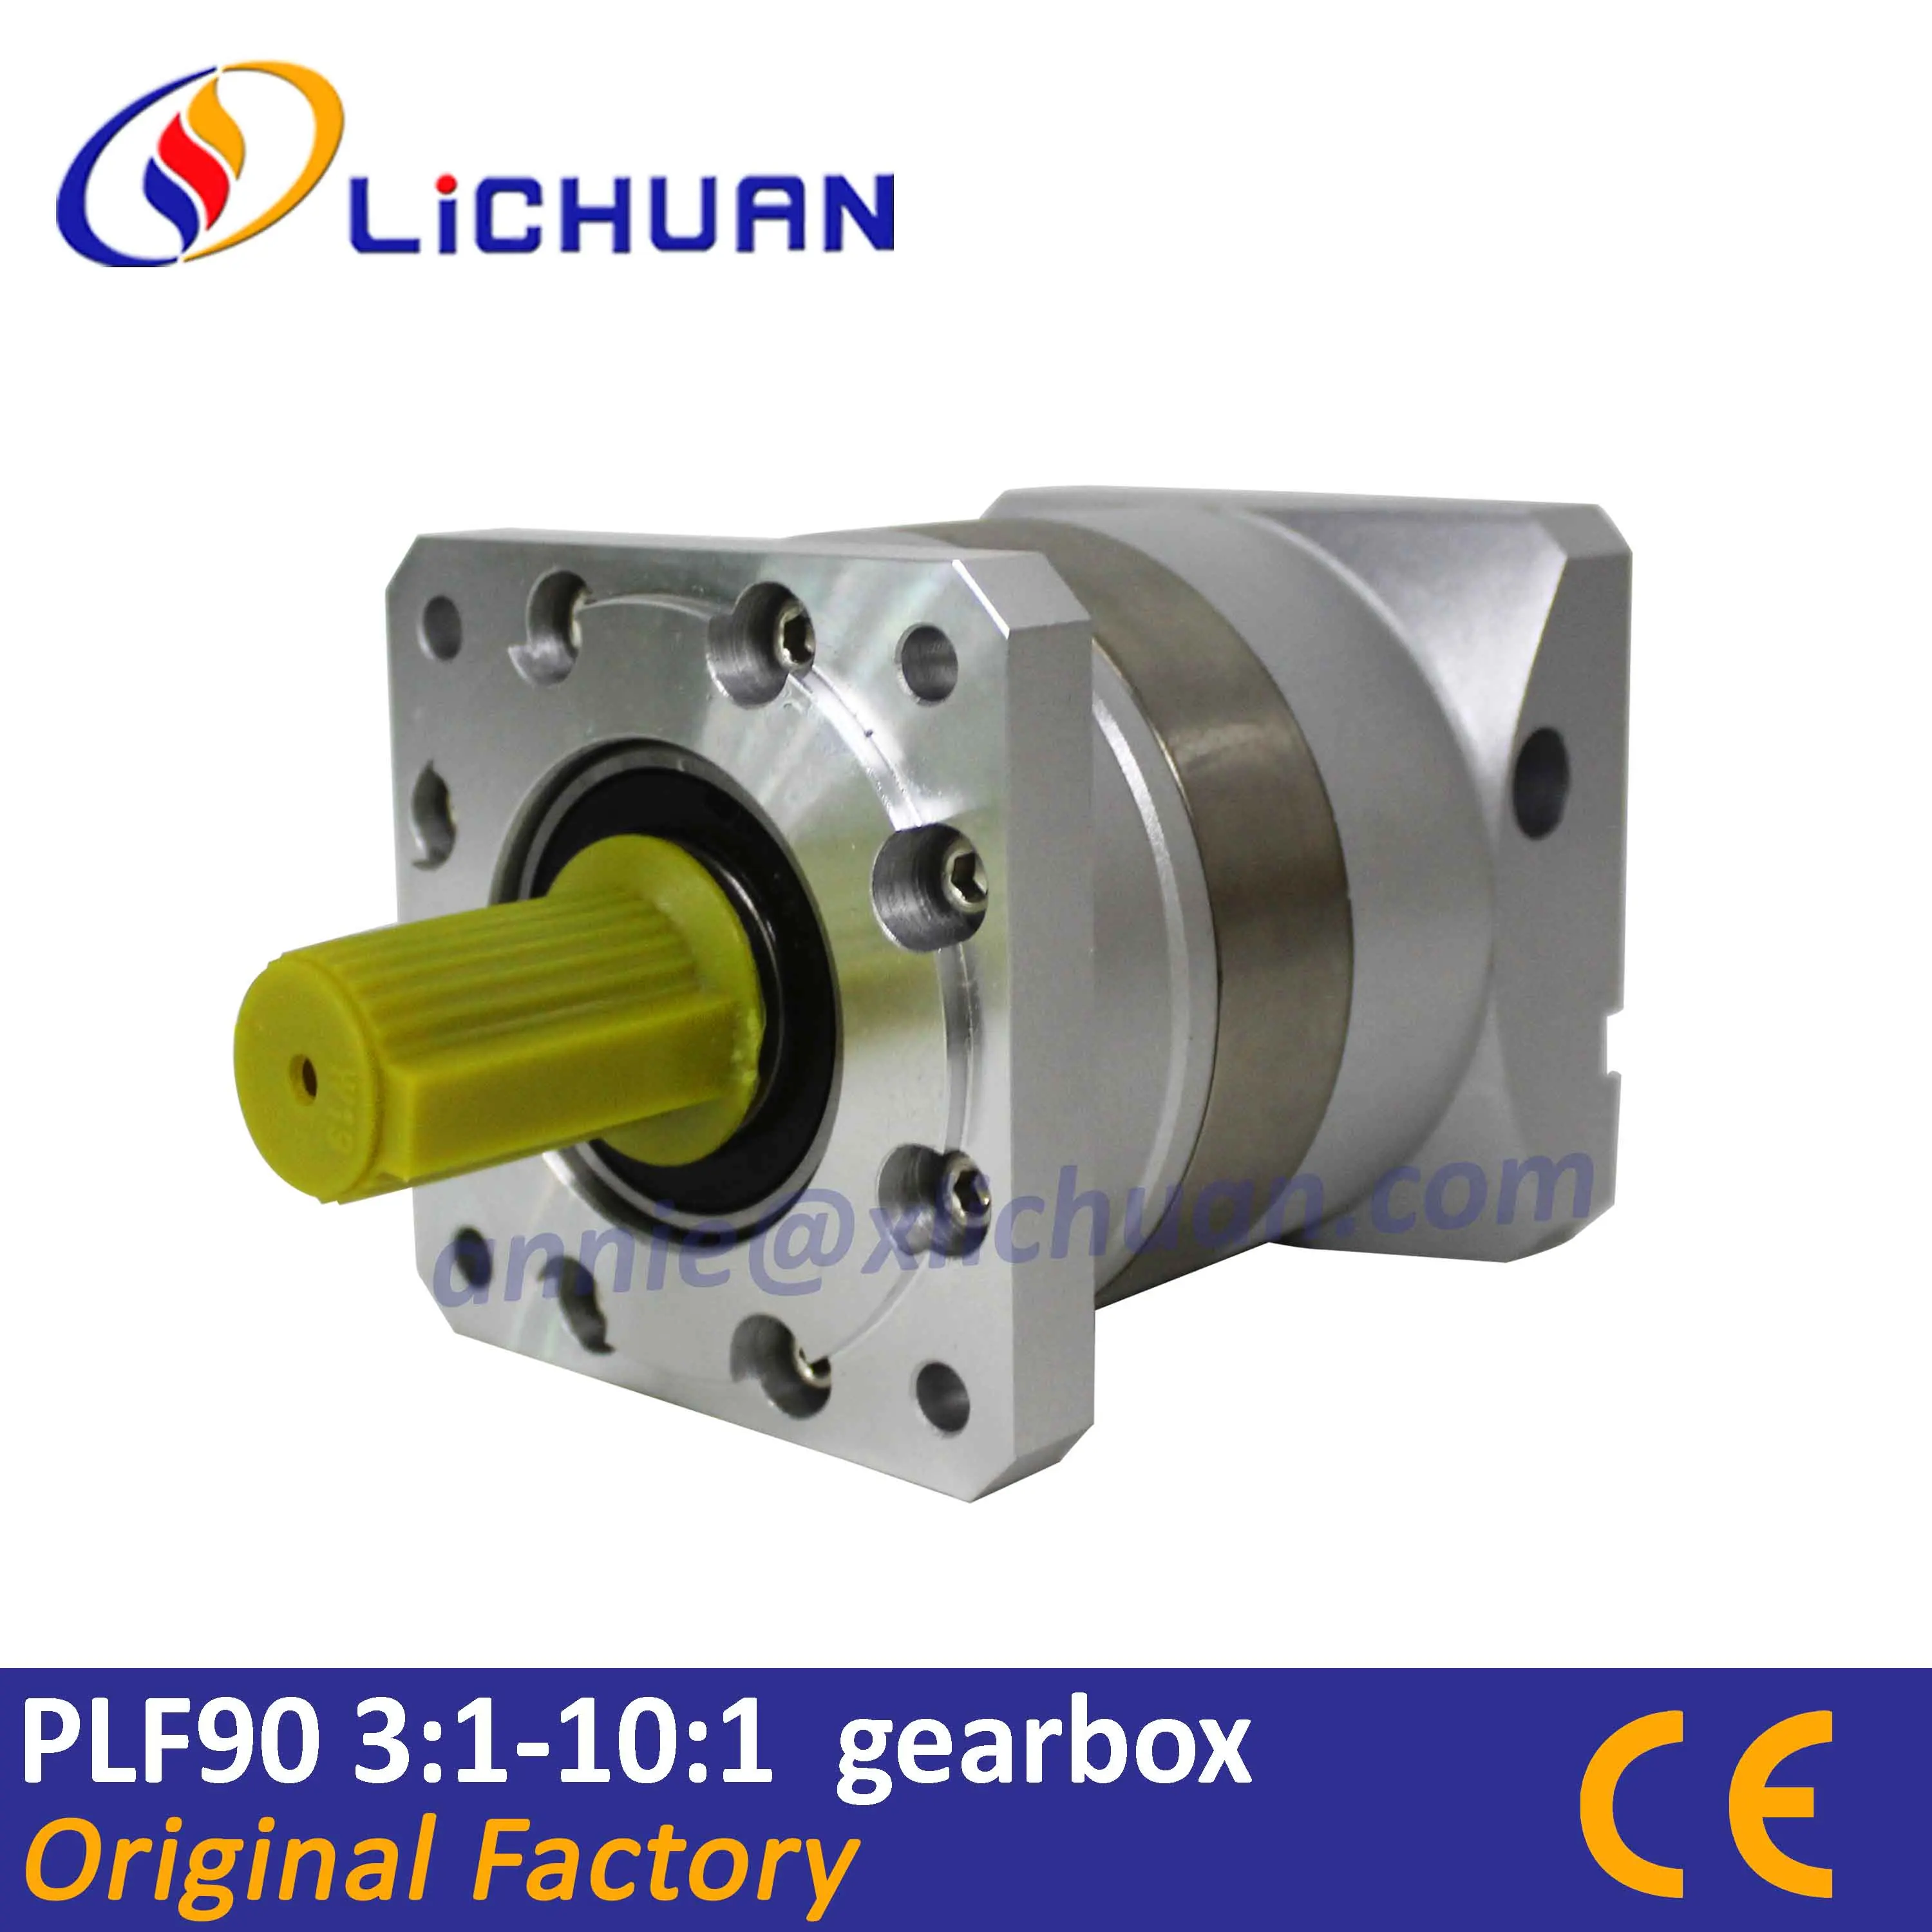 

90mm Frame Size Planetary Reducer Gearbox PLF90 3:1 4:1 5:1 7:1 10:1 first stage gear ratio for Lichuan stepper and servo system